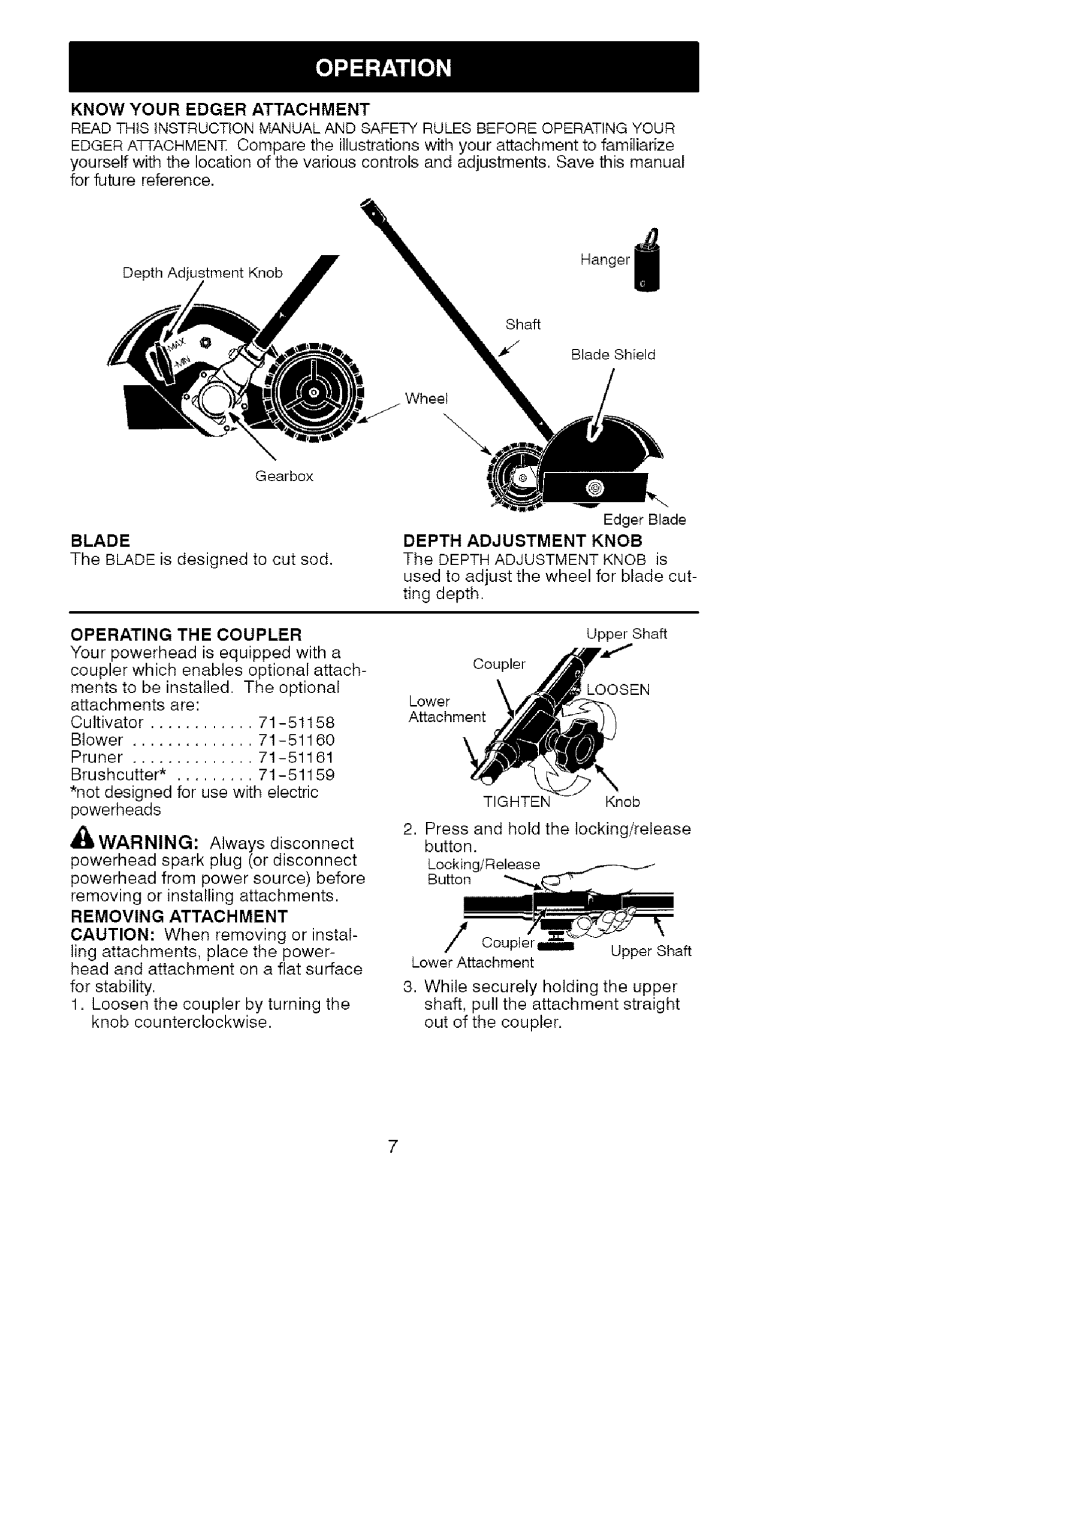 Craftsman C944.511573 instruction manual Knowyour Edger Attachment, Blade, Operating The Coupler, Depth Adjustment Knob 